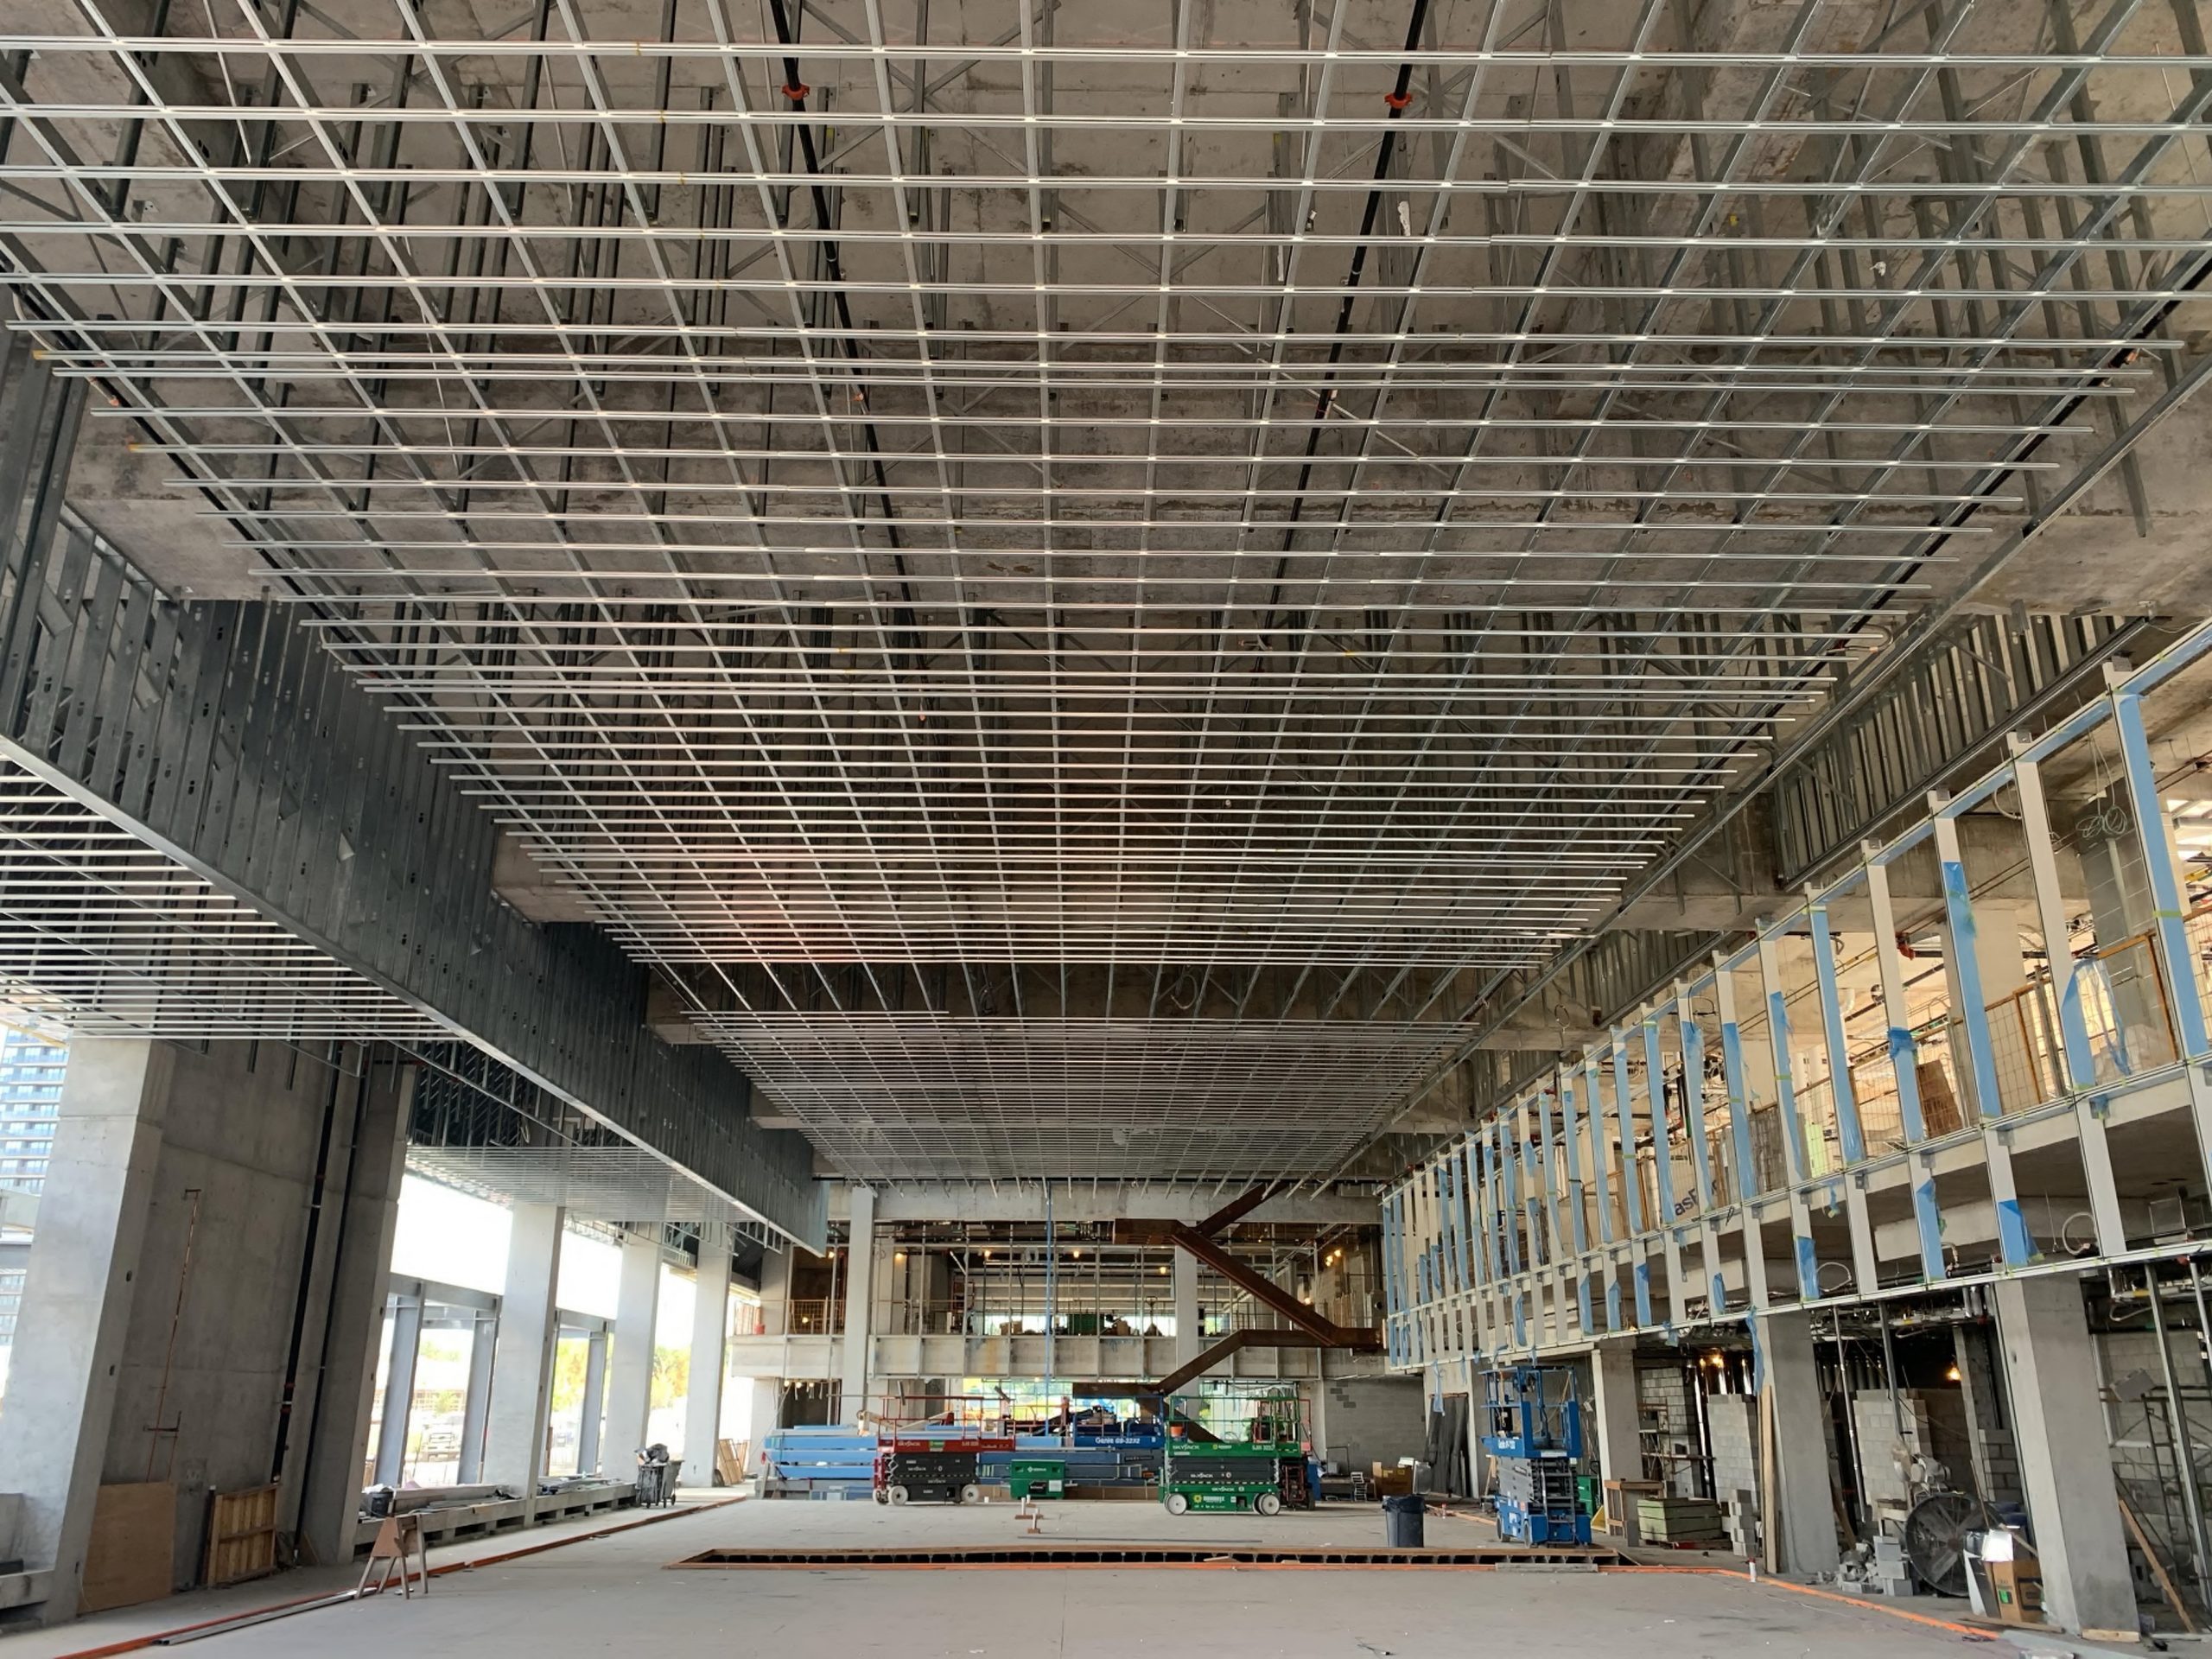 A picture of the interior of the new Community Recreation Centre while under construction. The pictures shows large exposed concrete walls with metal beams forming a grid across the ceiling. The second level is on the right side and does not have walls/glass windows yet. Various construction equipment is seen throughout the space. 